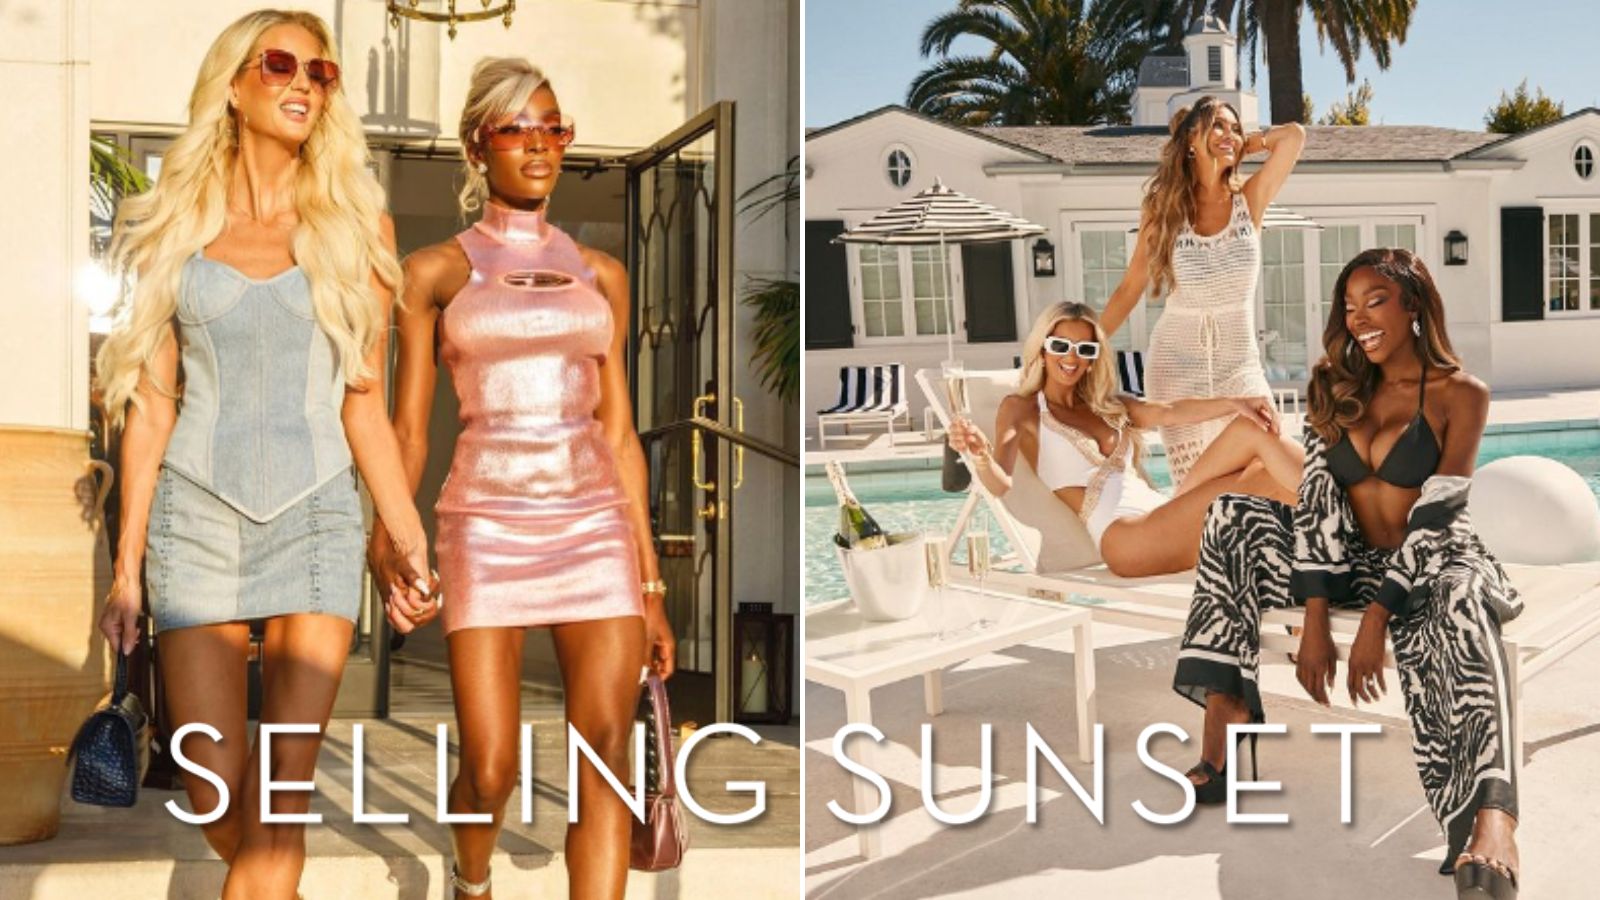 Selling Sunset': Do the Cast Members Pay for Their Own Clothes?